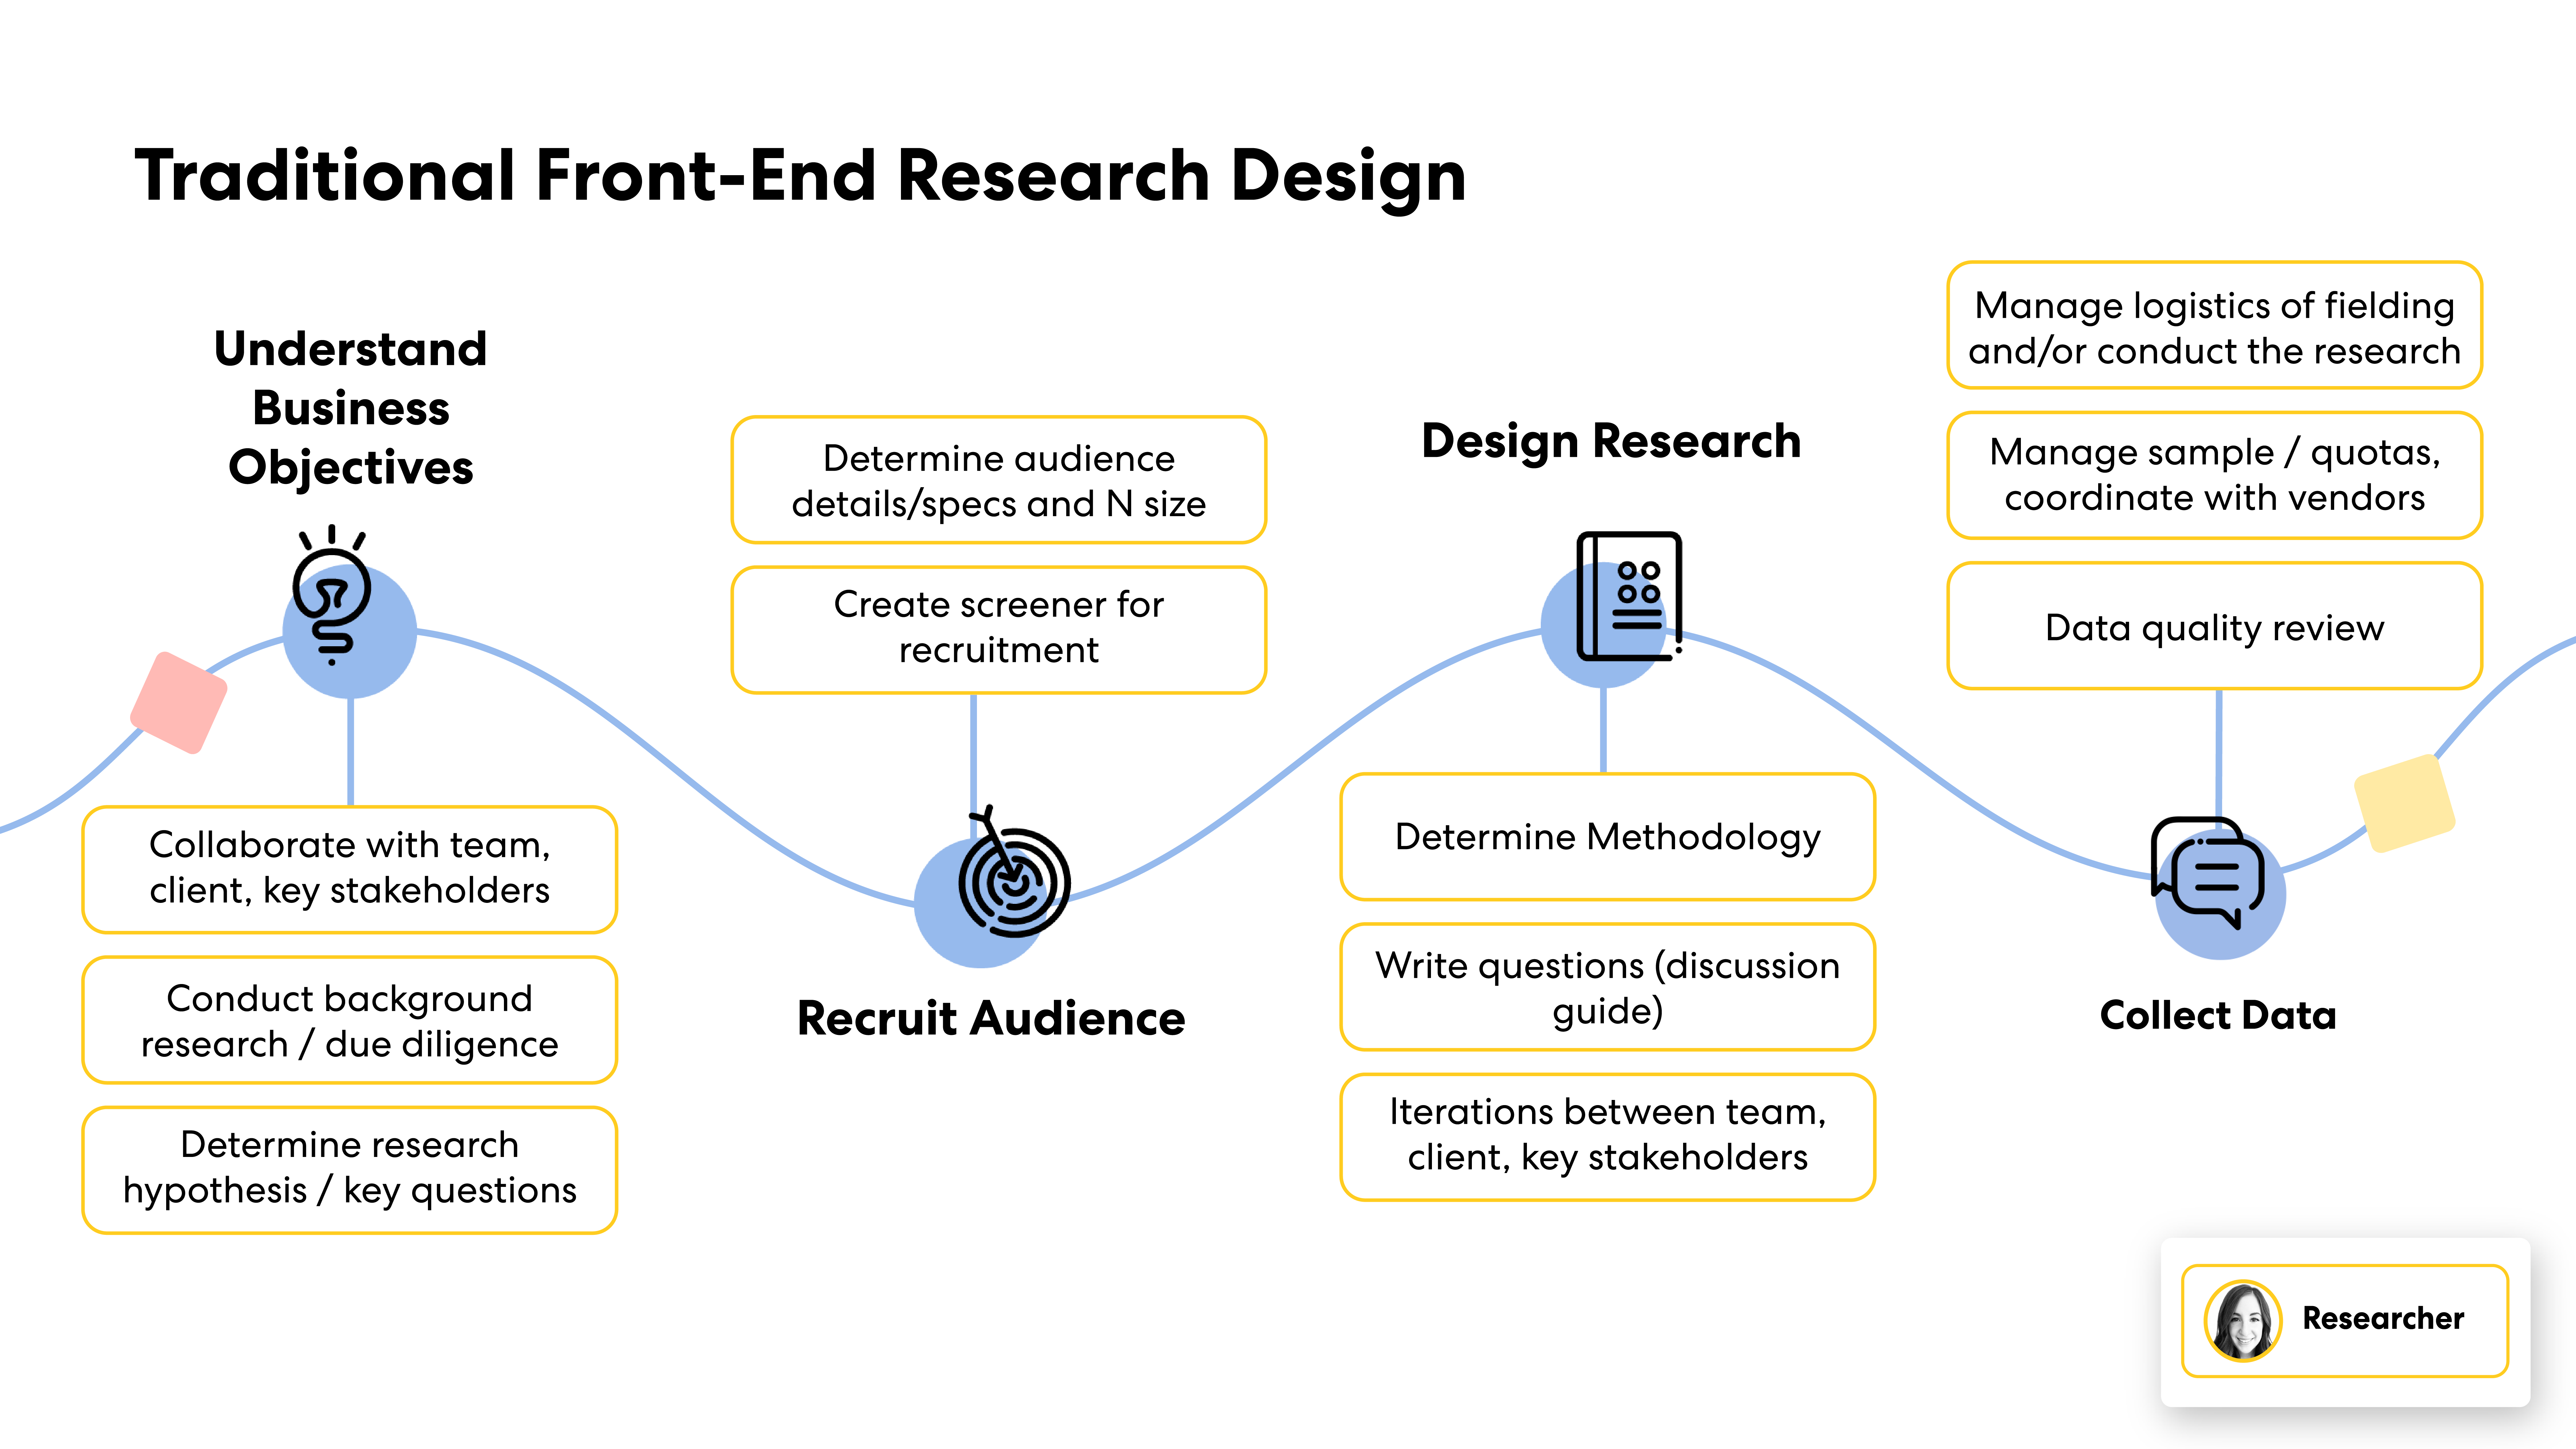 Traditional Front-End Research Design